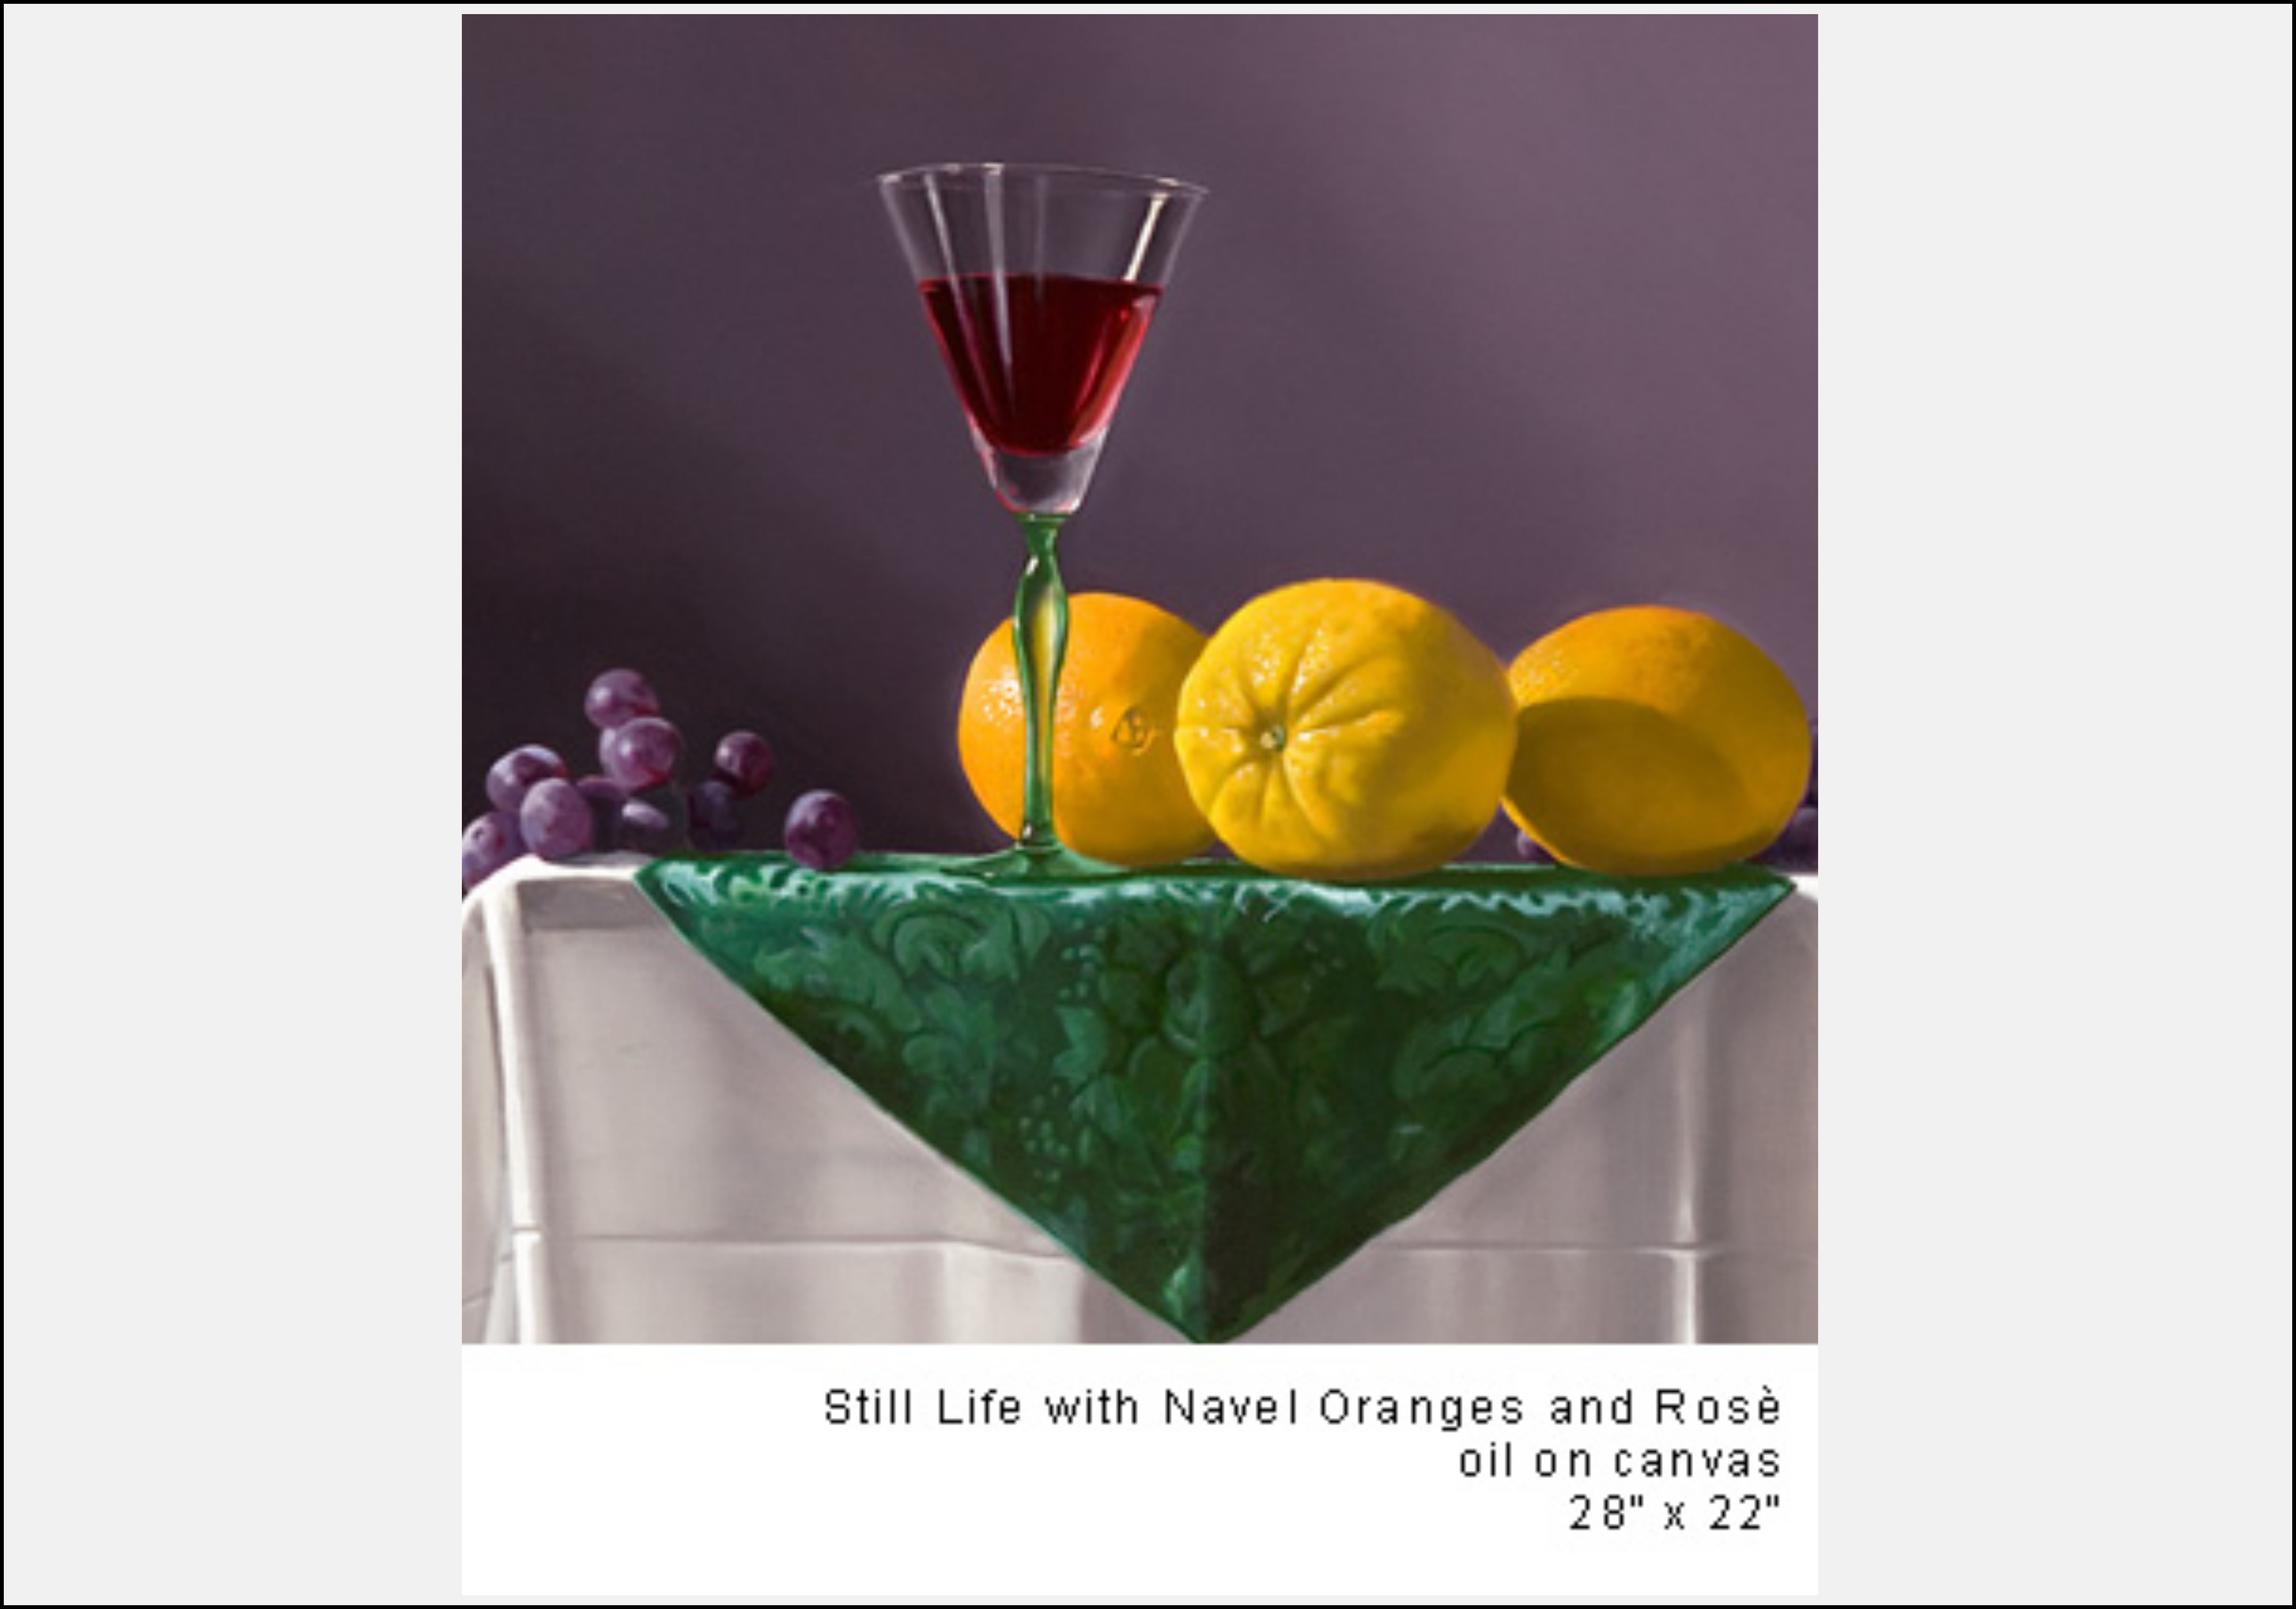 Still Life with Navel Oranges and Rosé